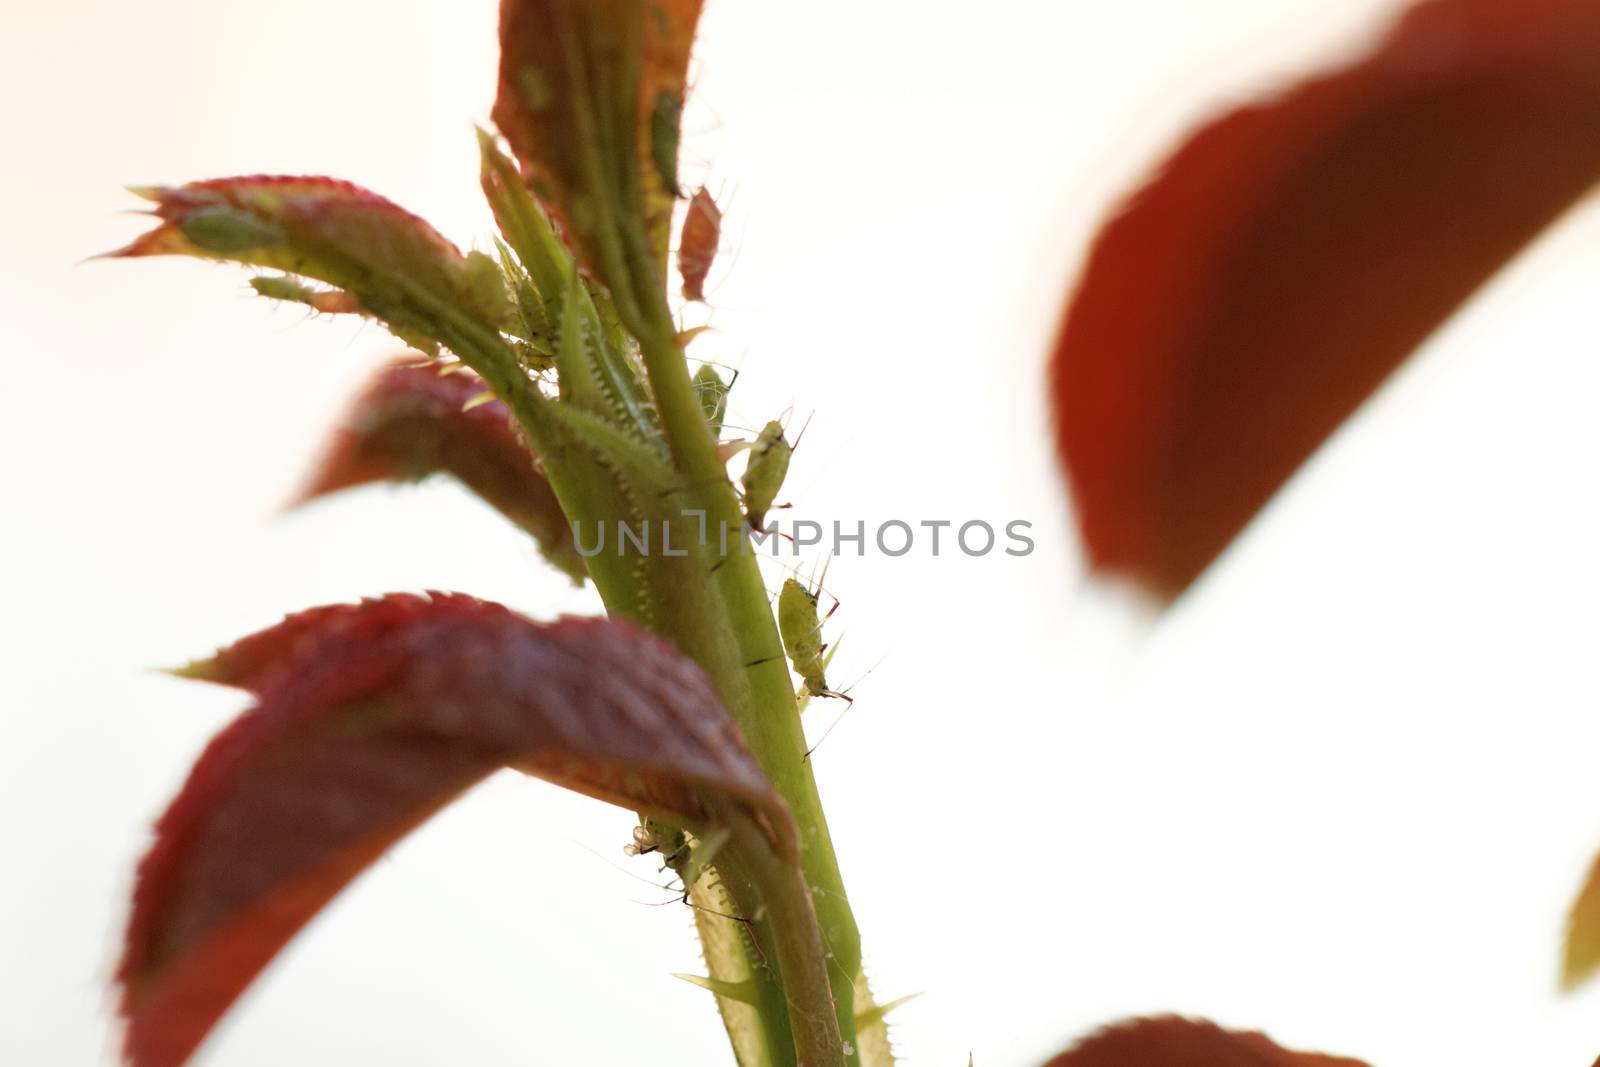 Photo of the small green aphid in the rose